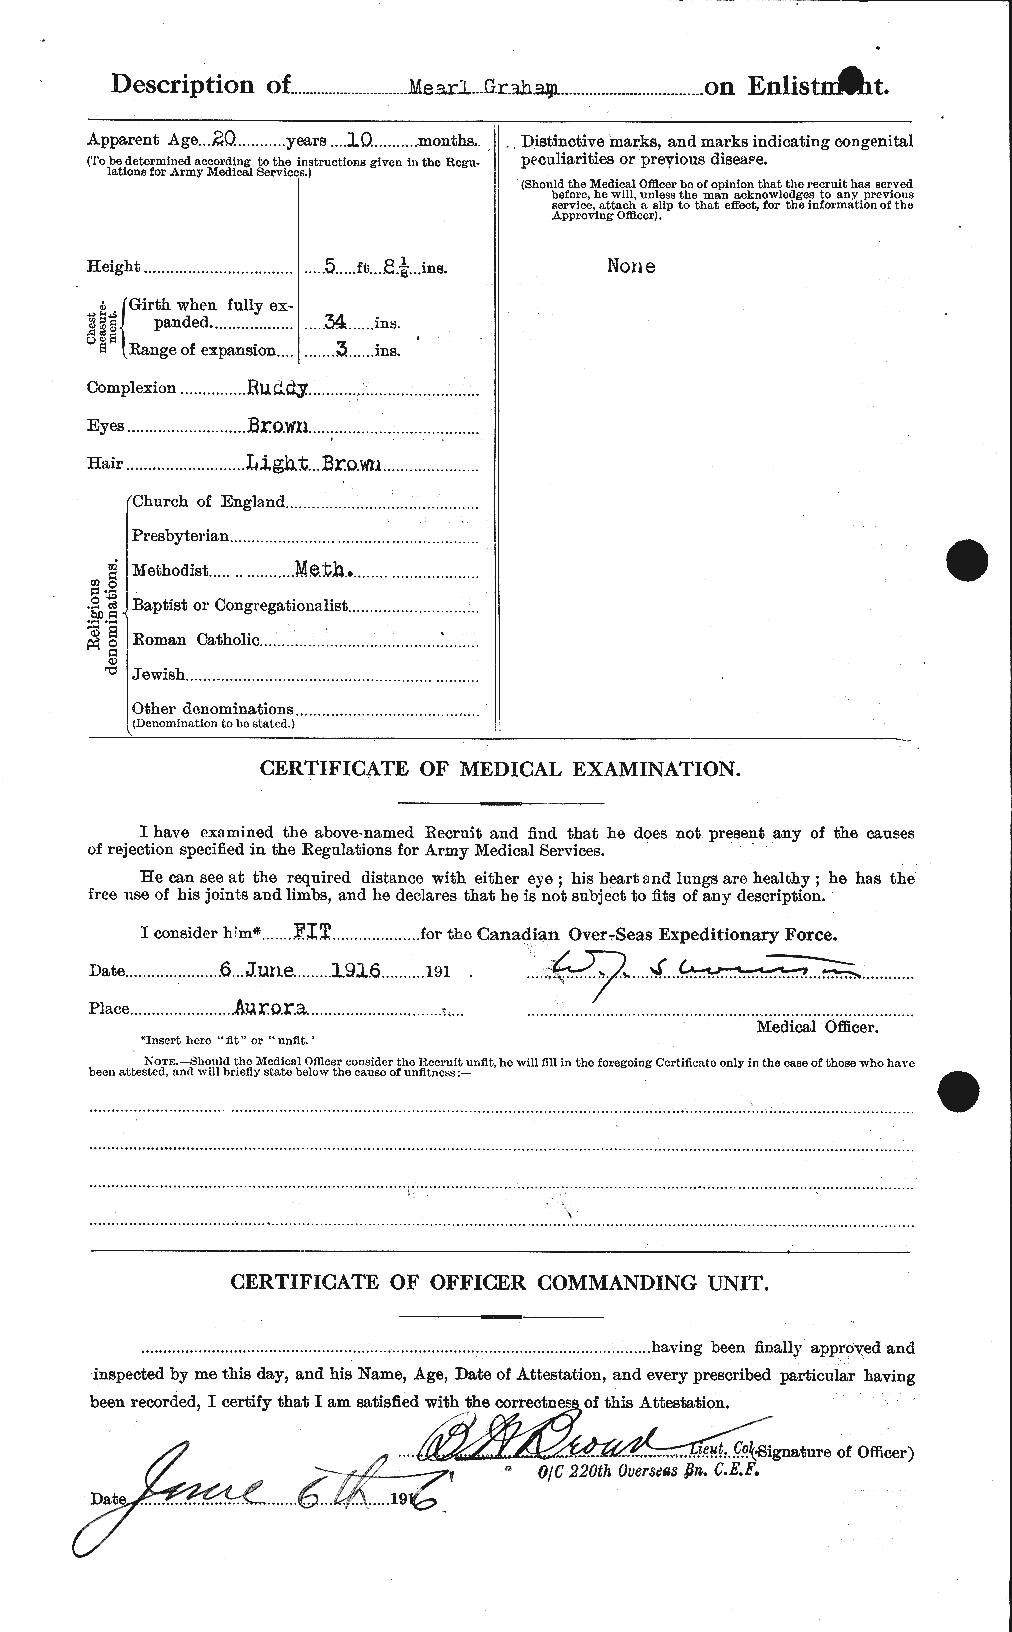 Personnel Records of the First World War - CEF 359300b